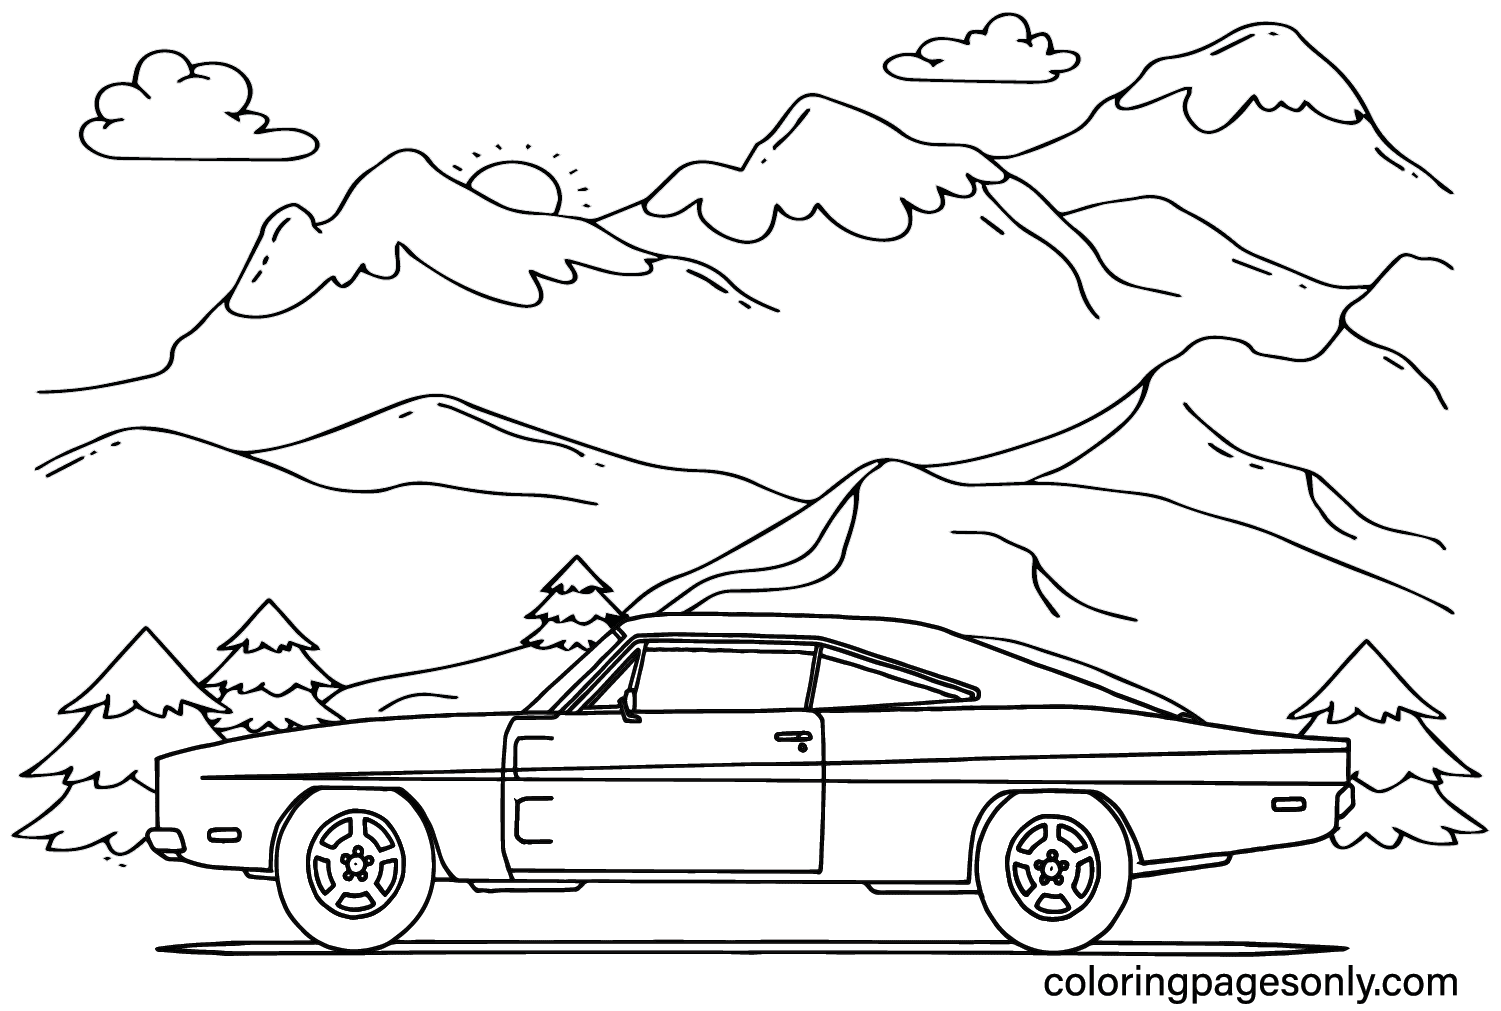 Dodge Pictures to Color